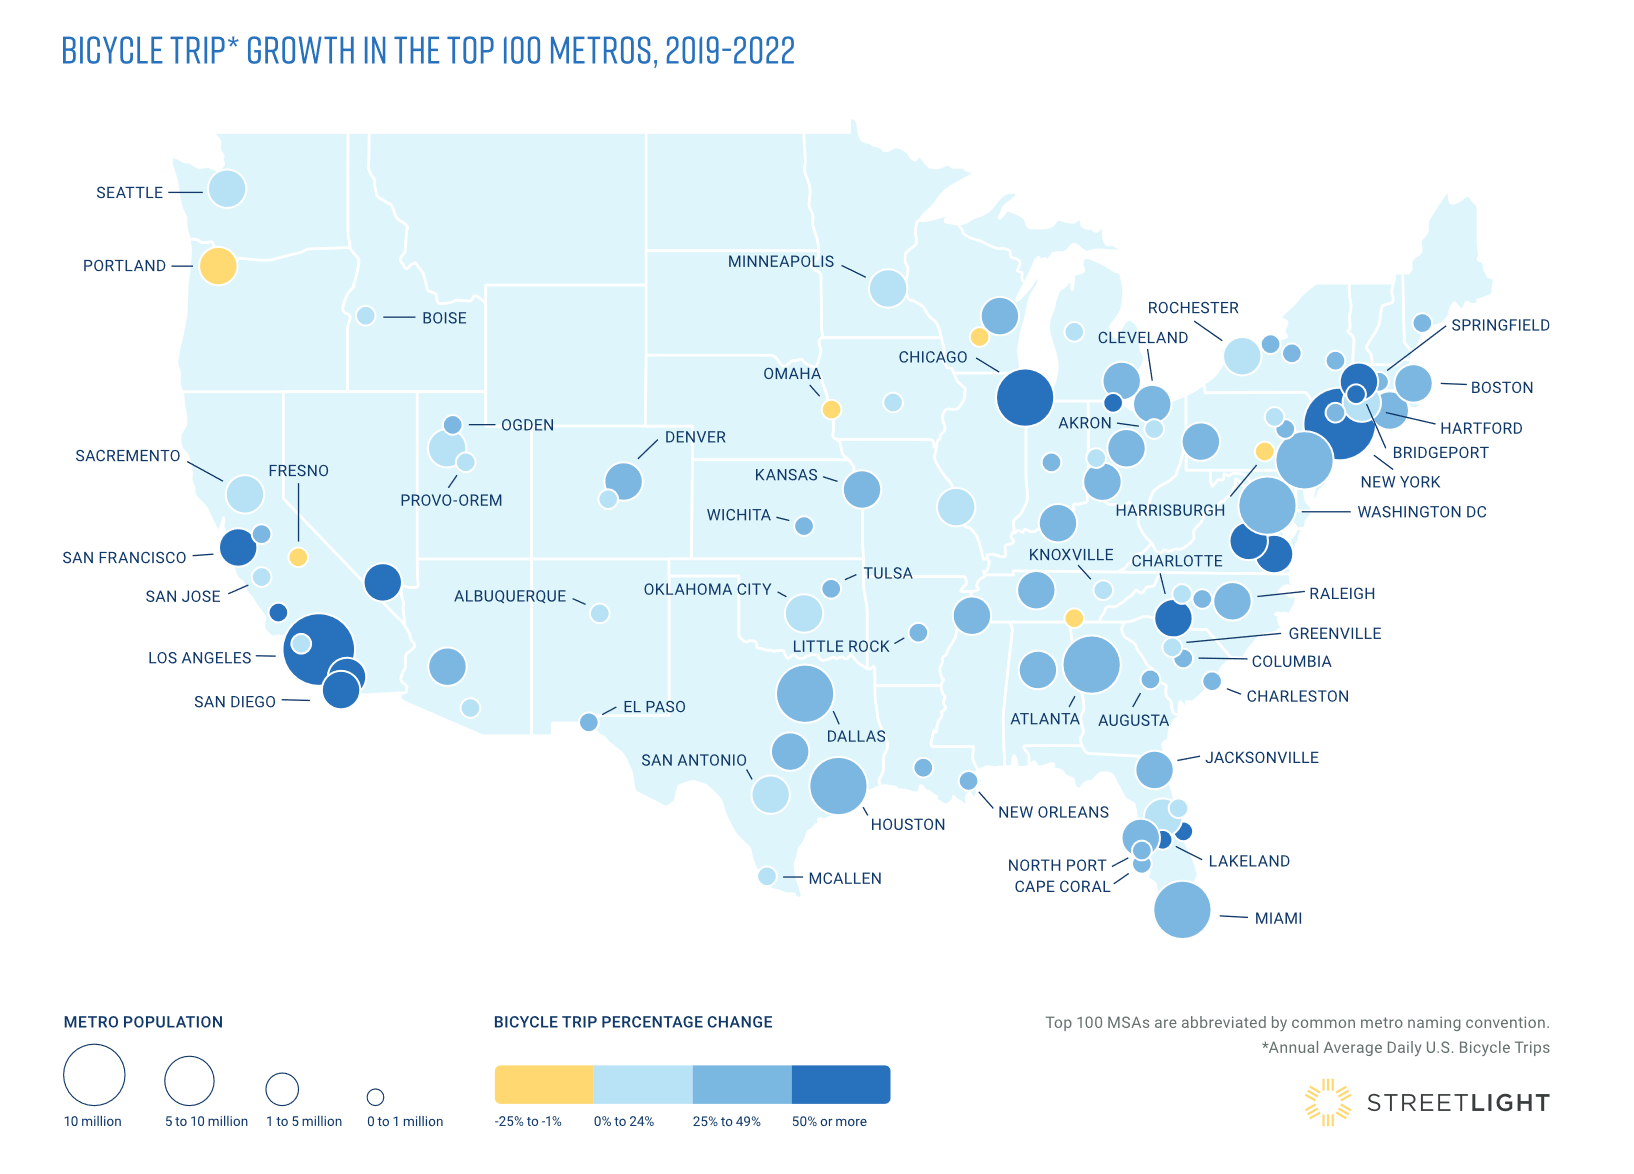 Bicycle trip growth in the top 100 metro areas, 2019 to 2022